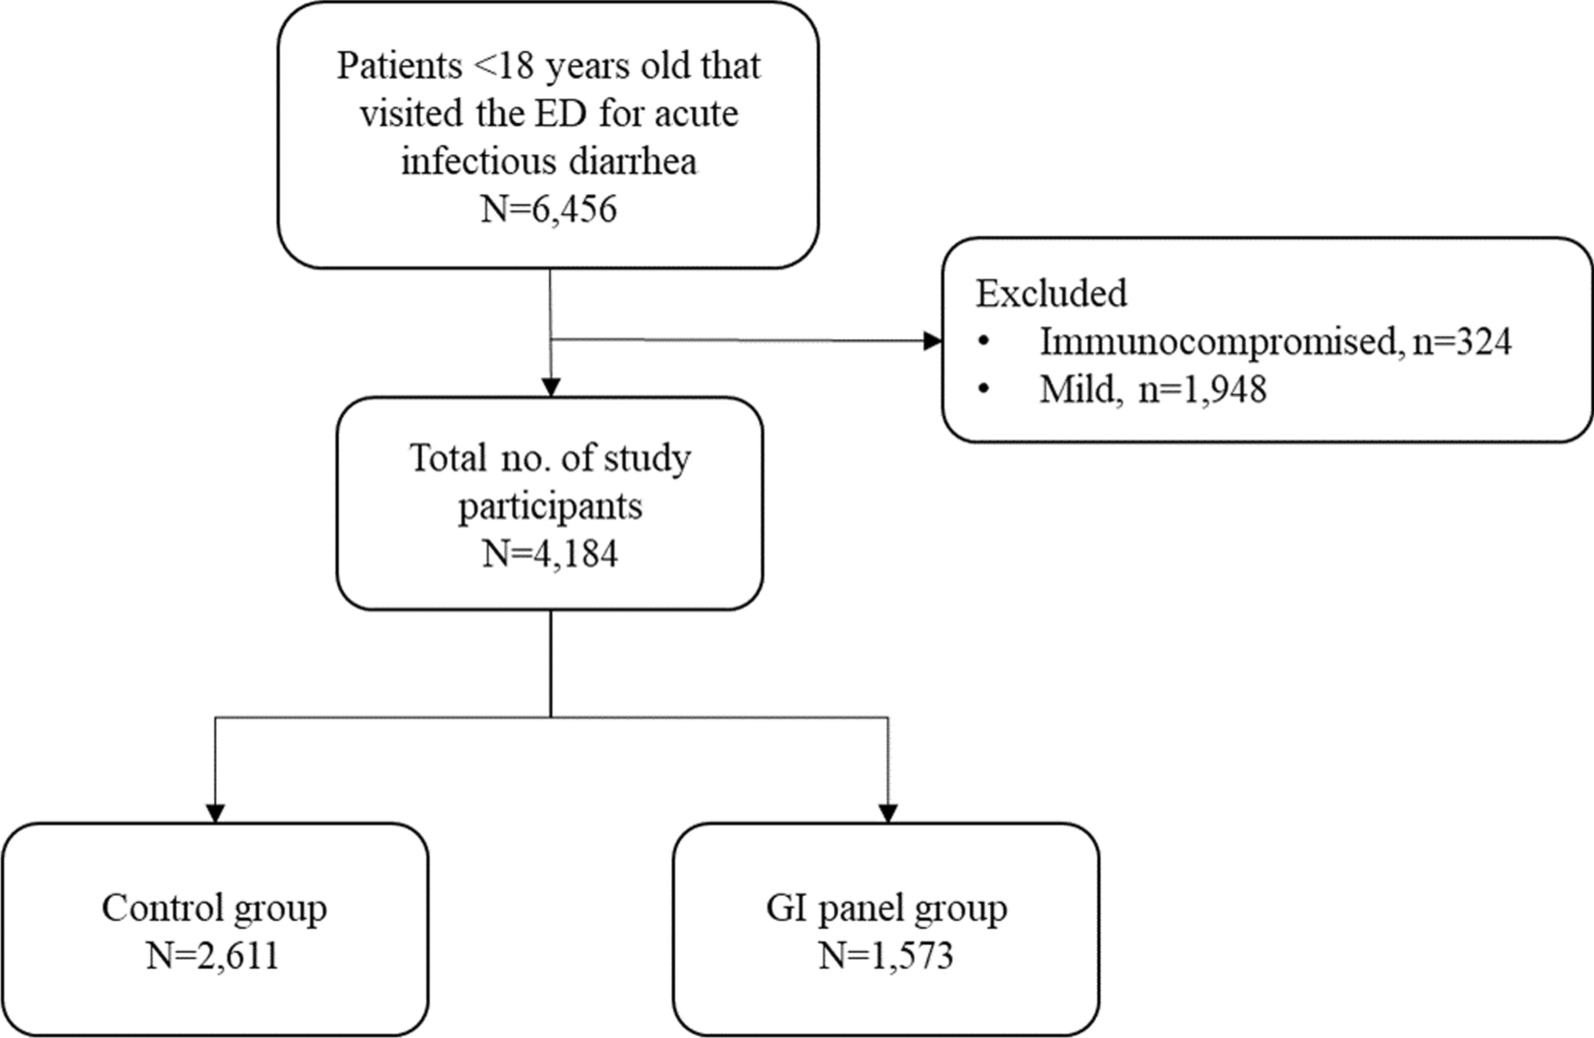 The role of rapid syndromic diagnostic testing of gastrointestinal pathogens as a clinical decision support tool in a pediatric emergency department